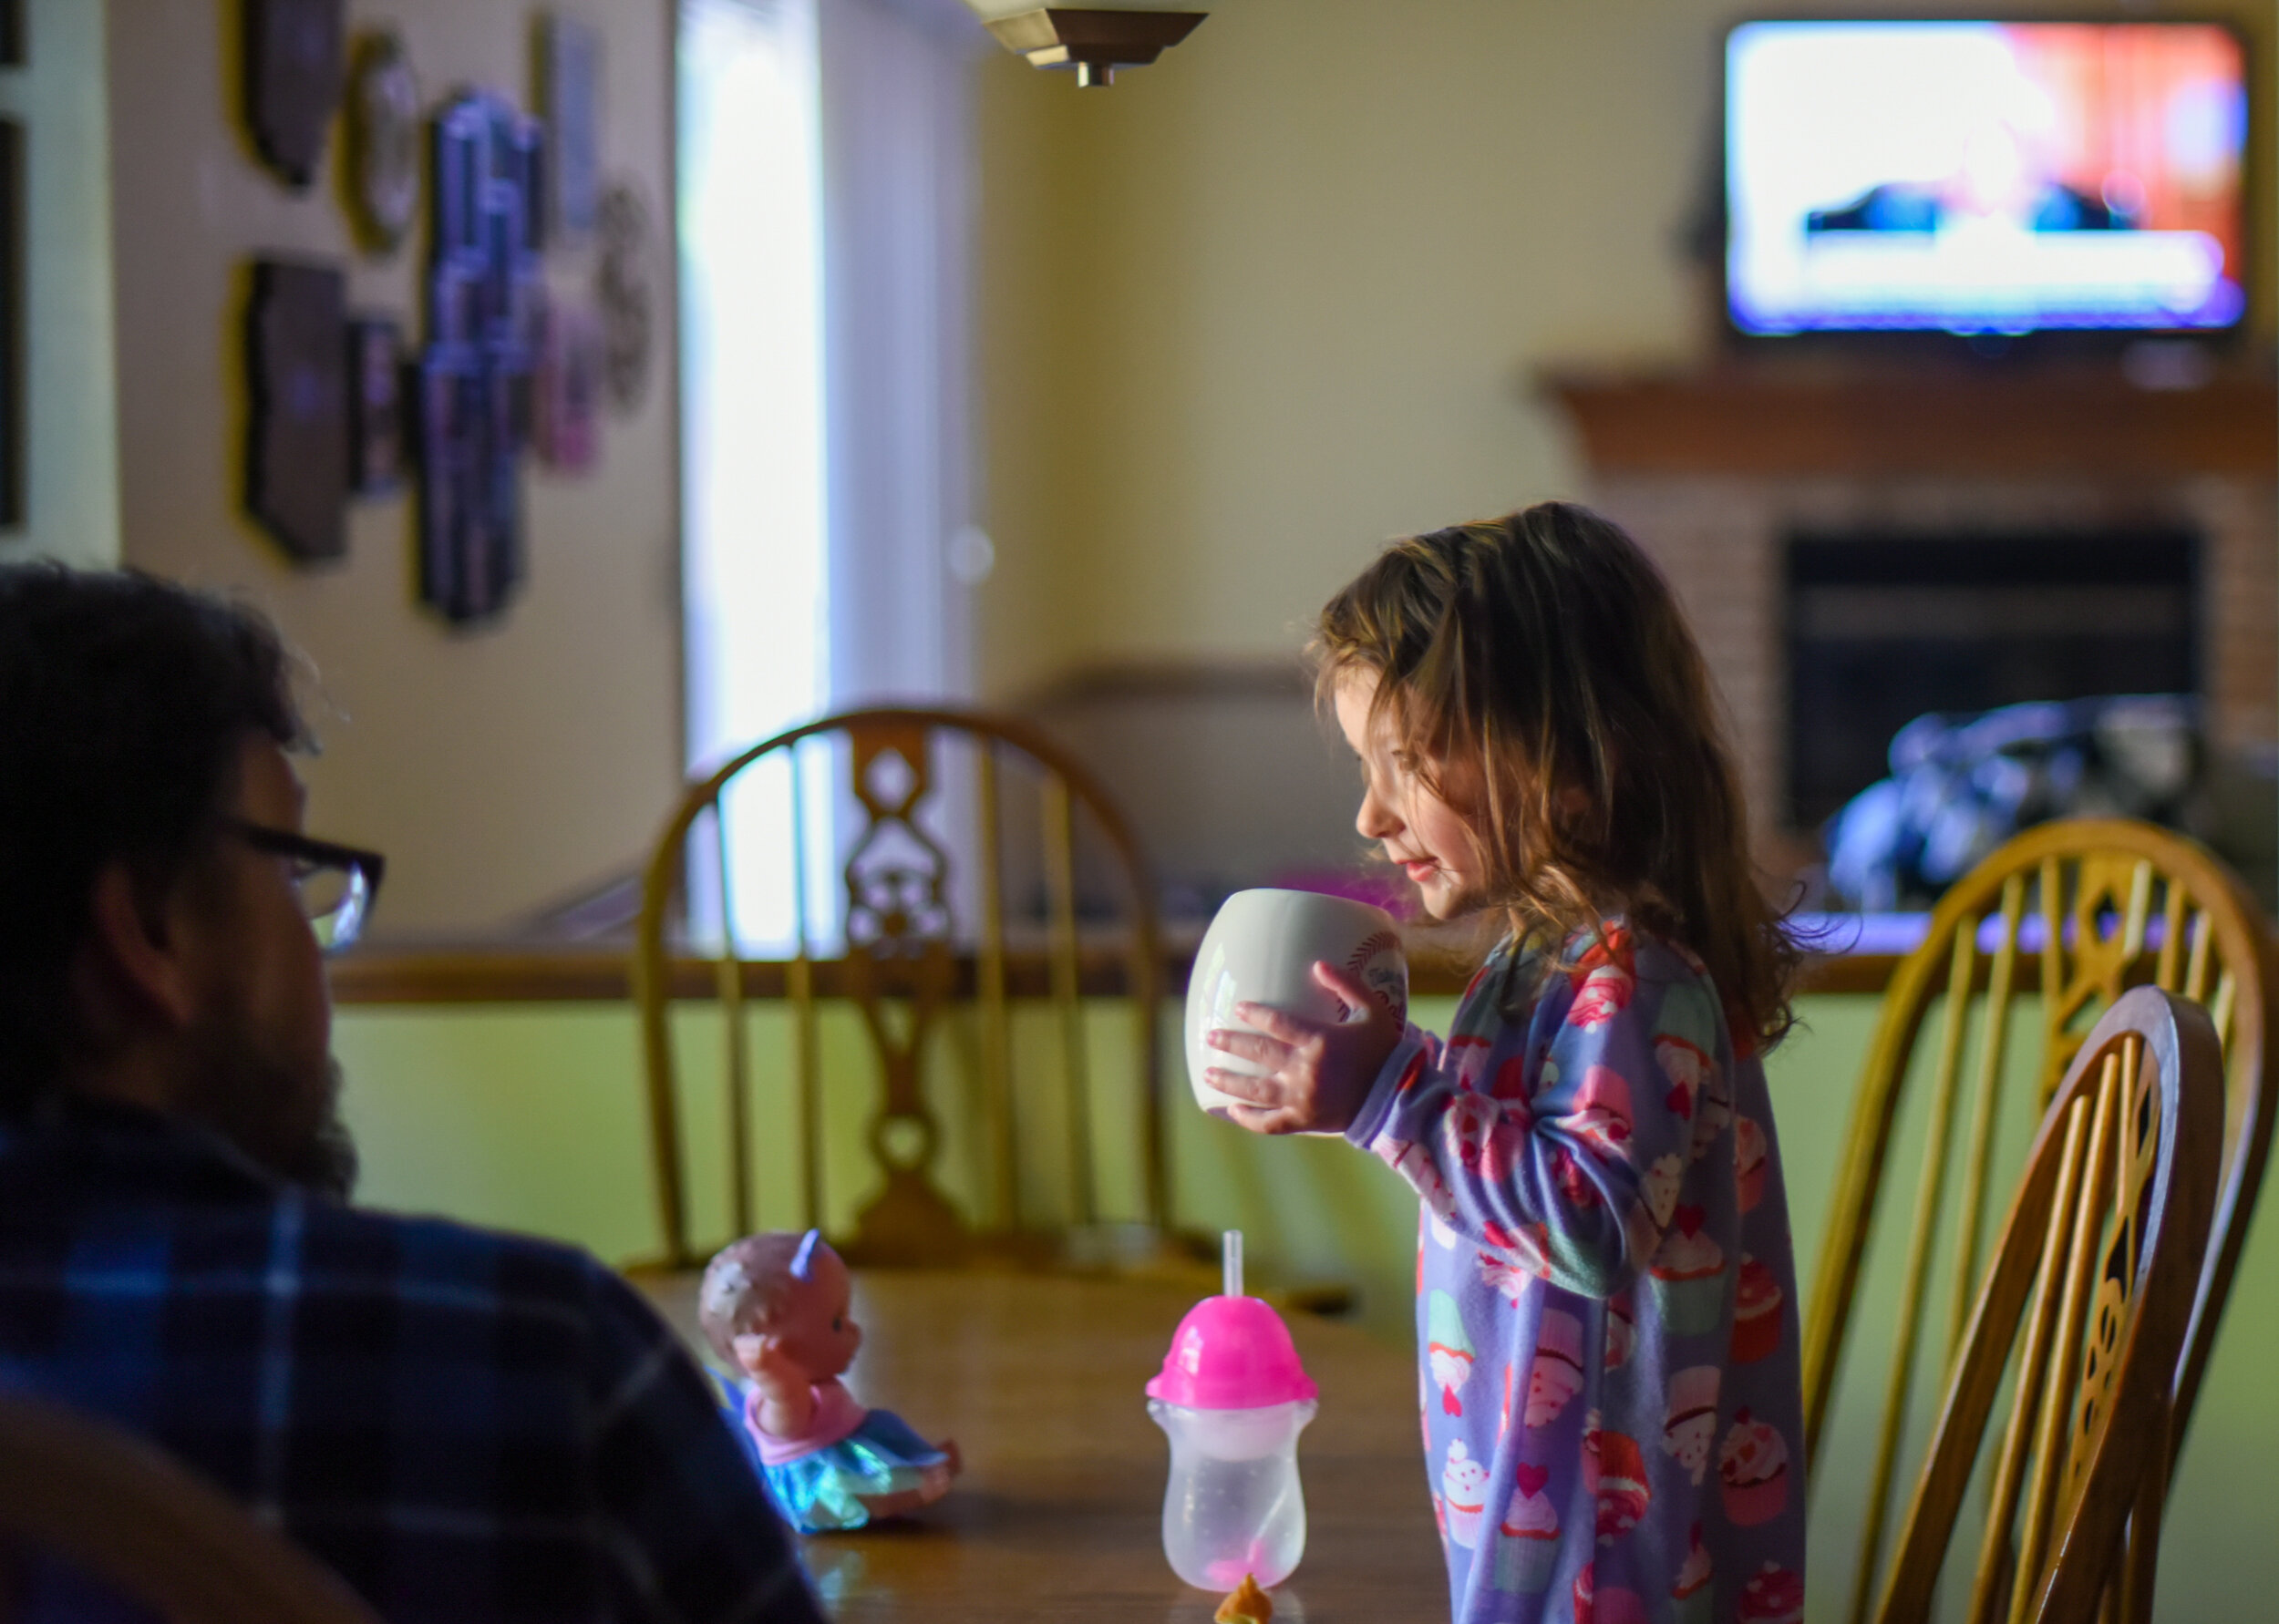 little girl sitting at the dining room table with her dad while drinking water out of a coffee mug and watching tv